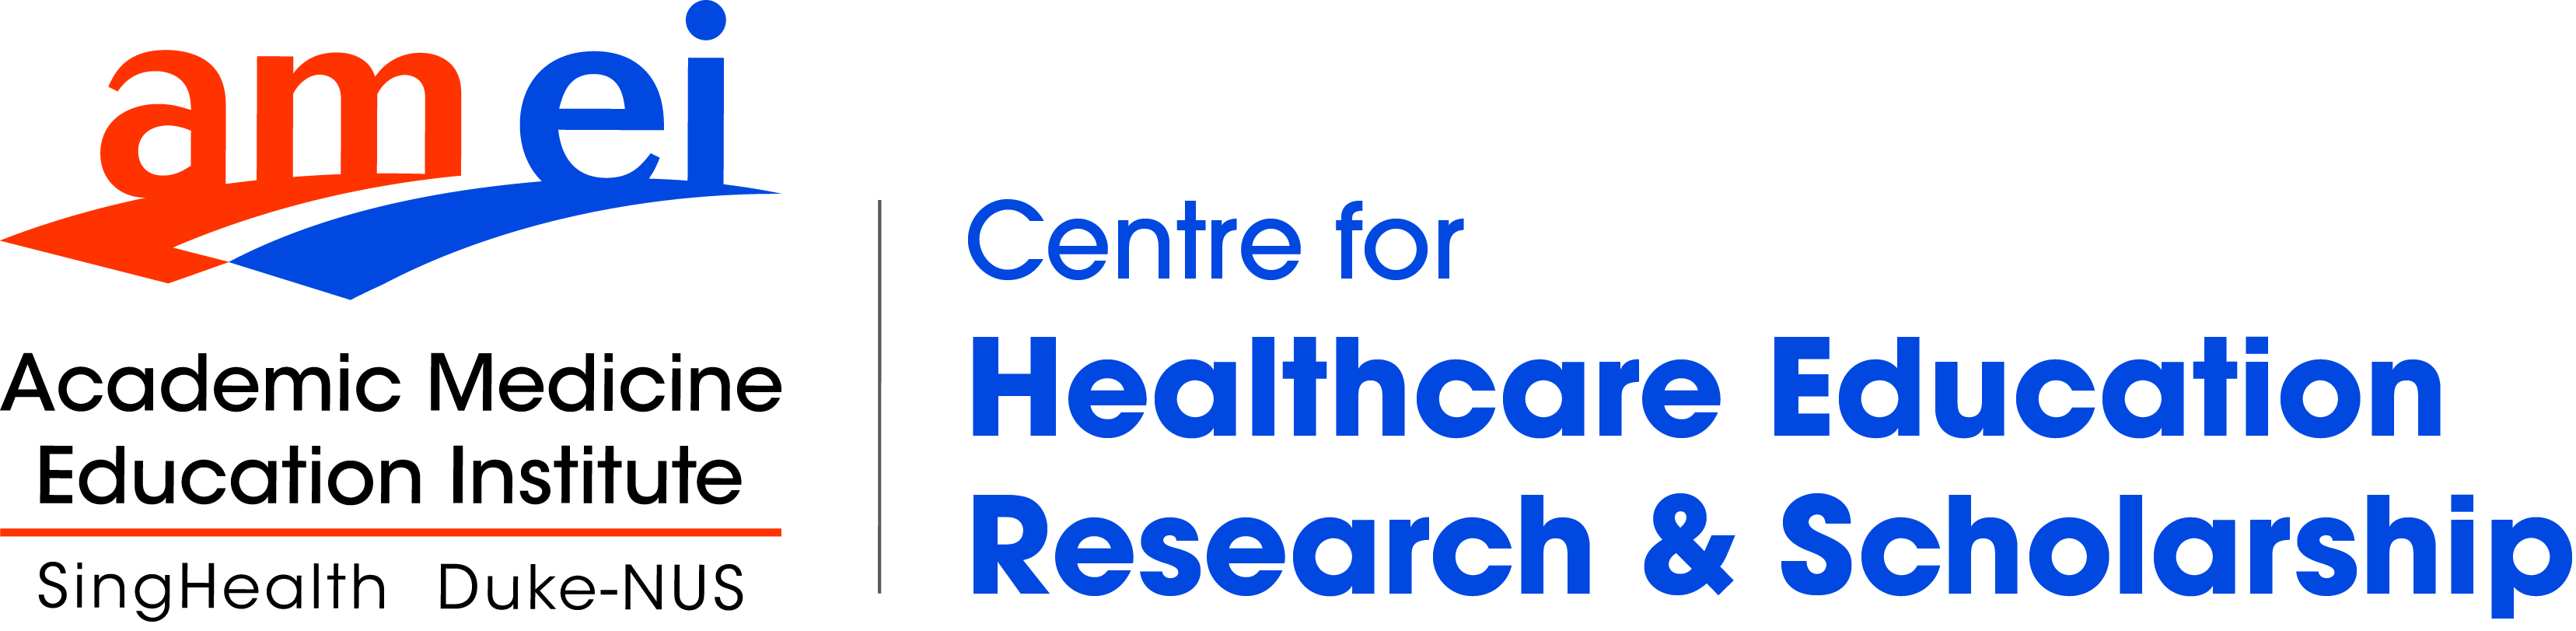 Centre for Healthcare Education Research and Scholarship.jpg